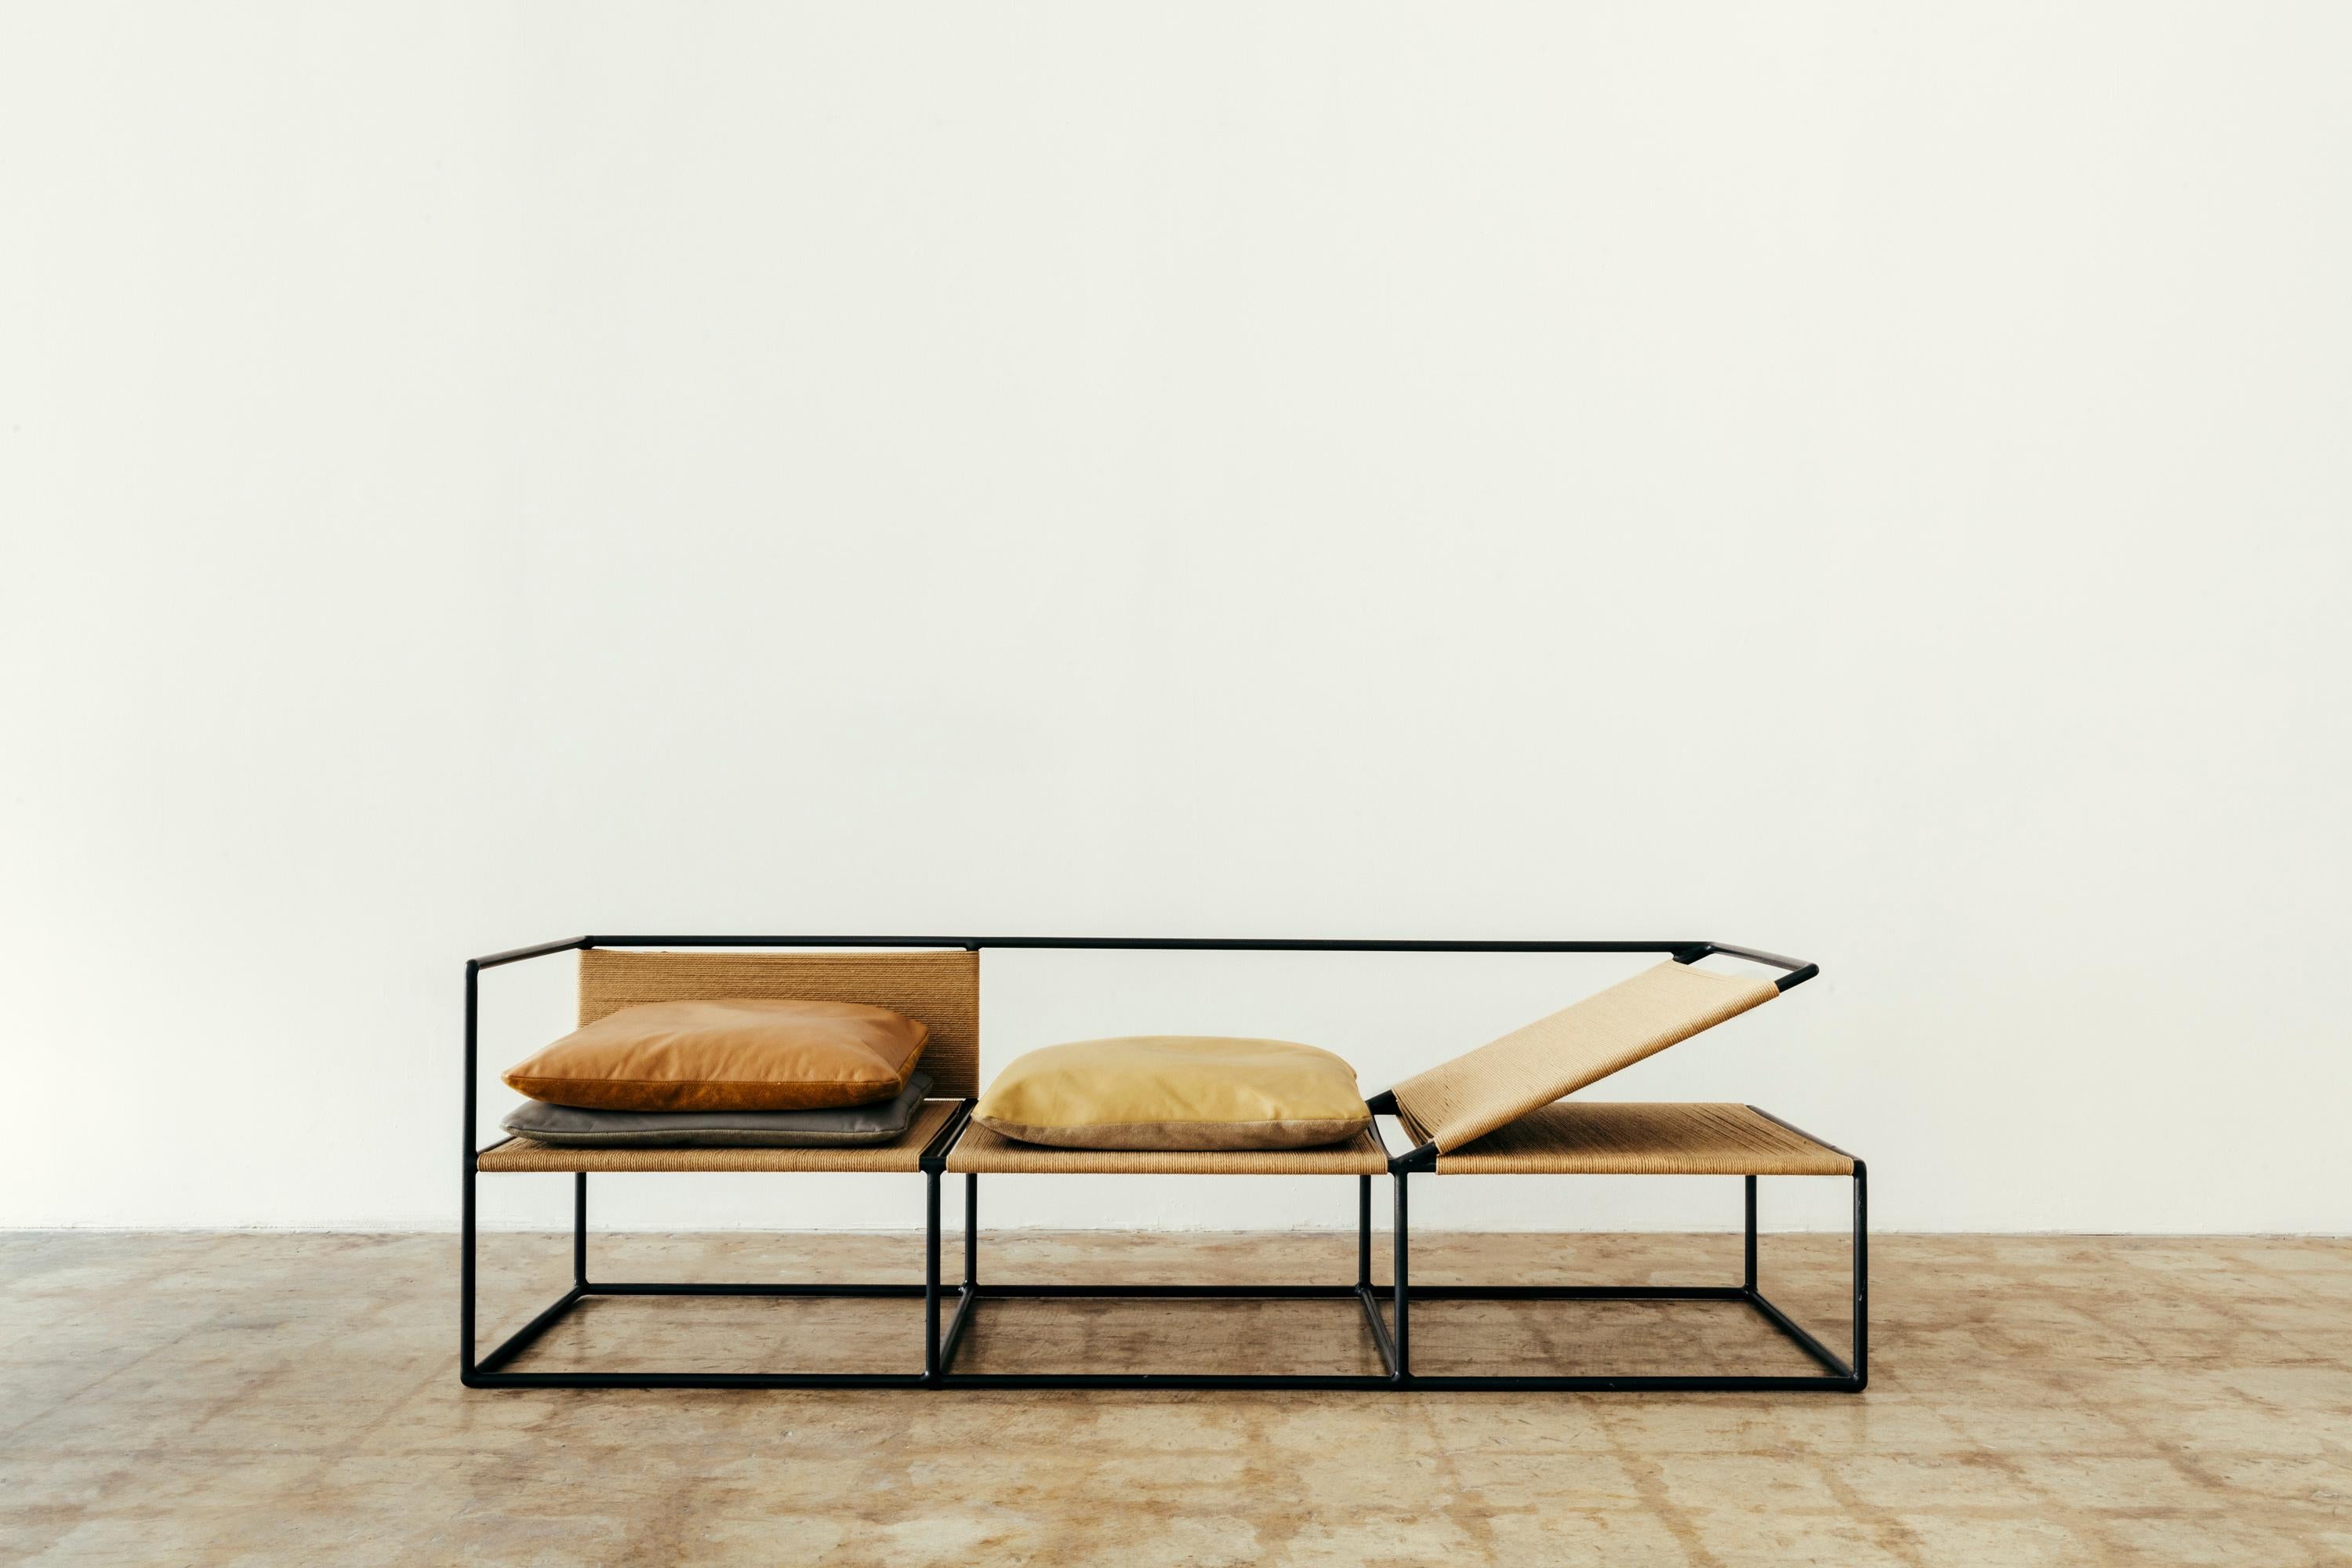 Chaise Lounge handmade with Danish paper cord and raw metal frame - Contemporary Art by Jonathan Gonzalez